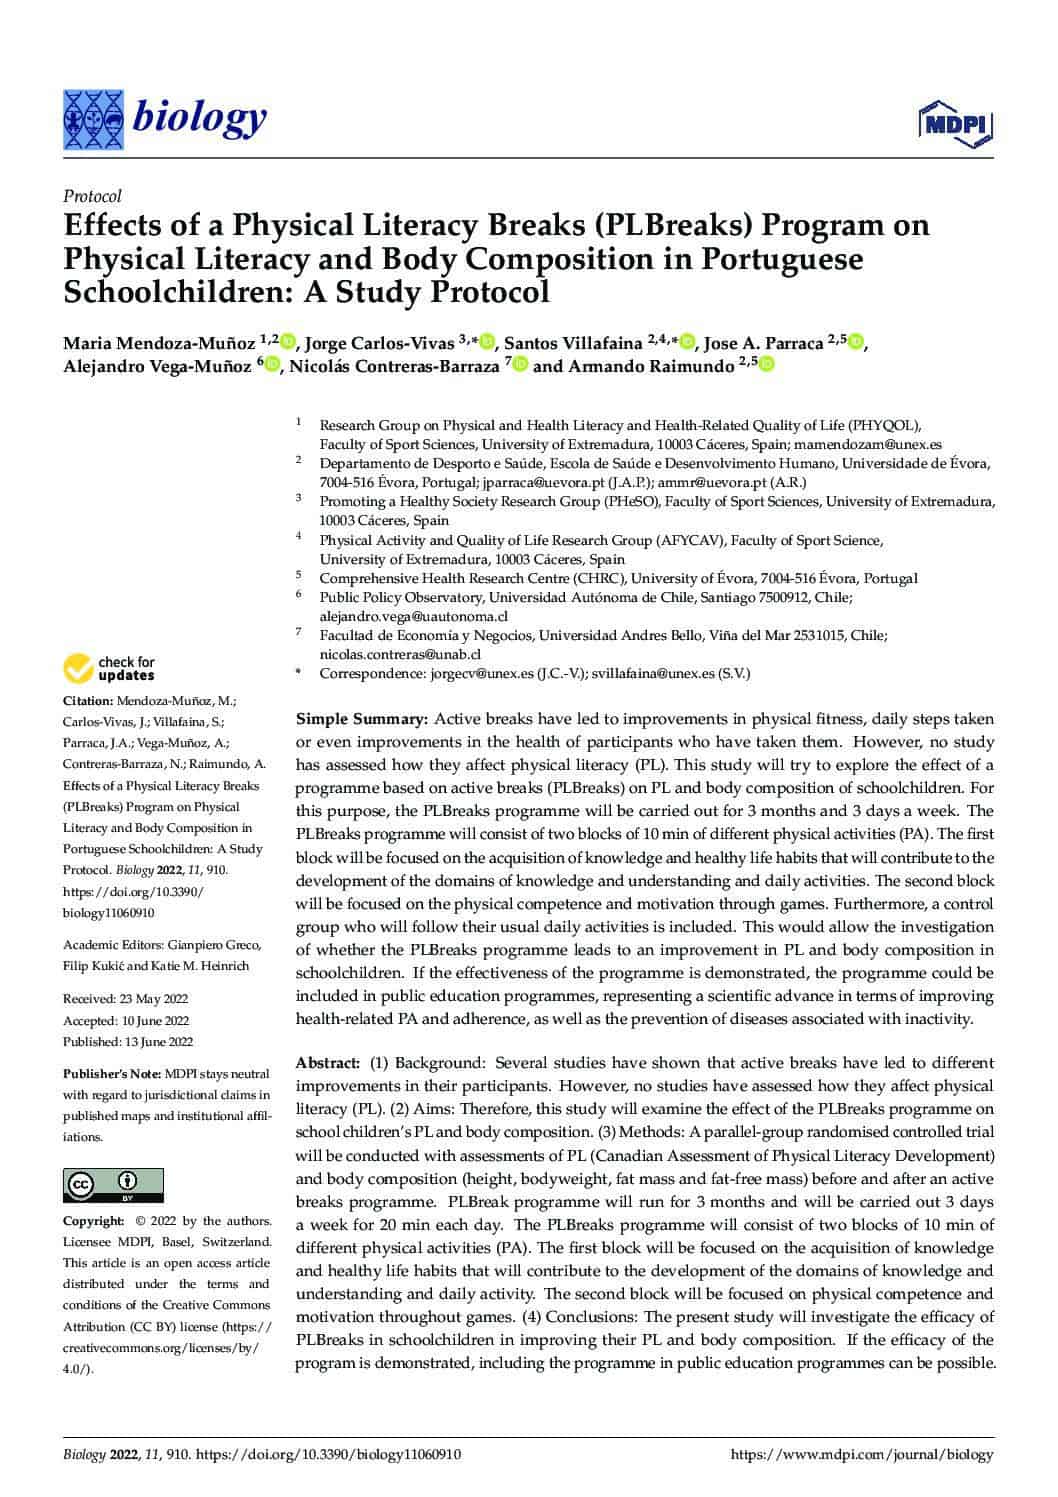 Effects of a Physical Literacy Breaks (PLBreaks) Program on Physical Literacy and Body Composition in Portuguese Schoolchildren: A Study Protocol